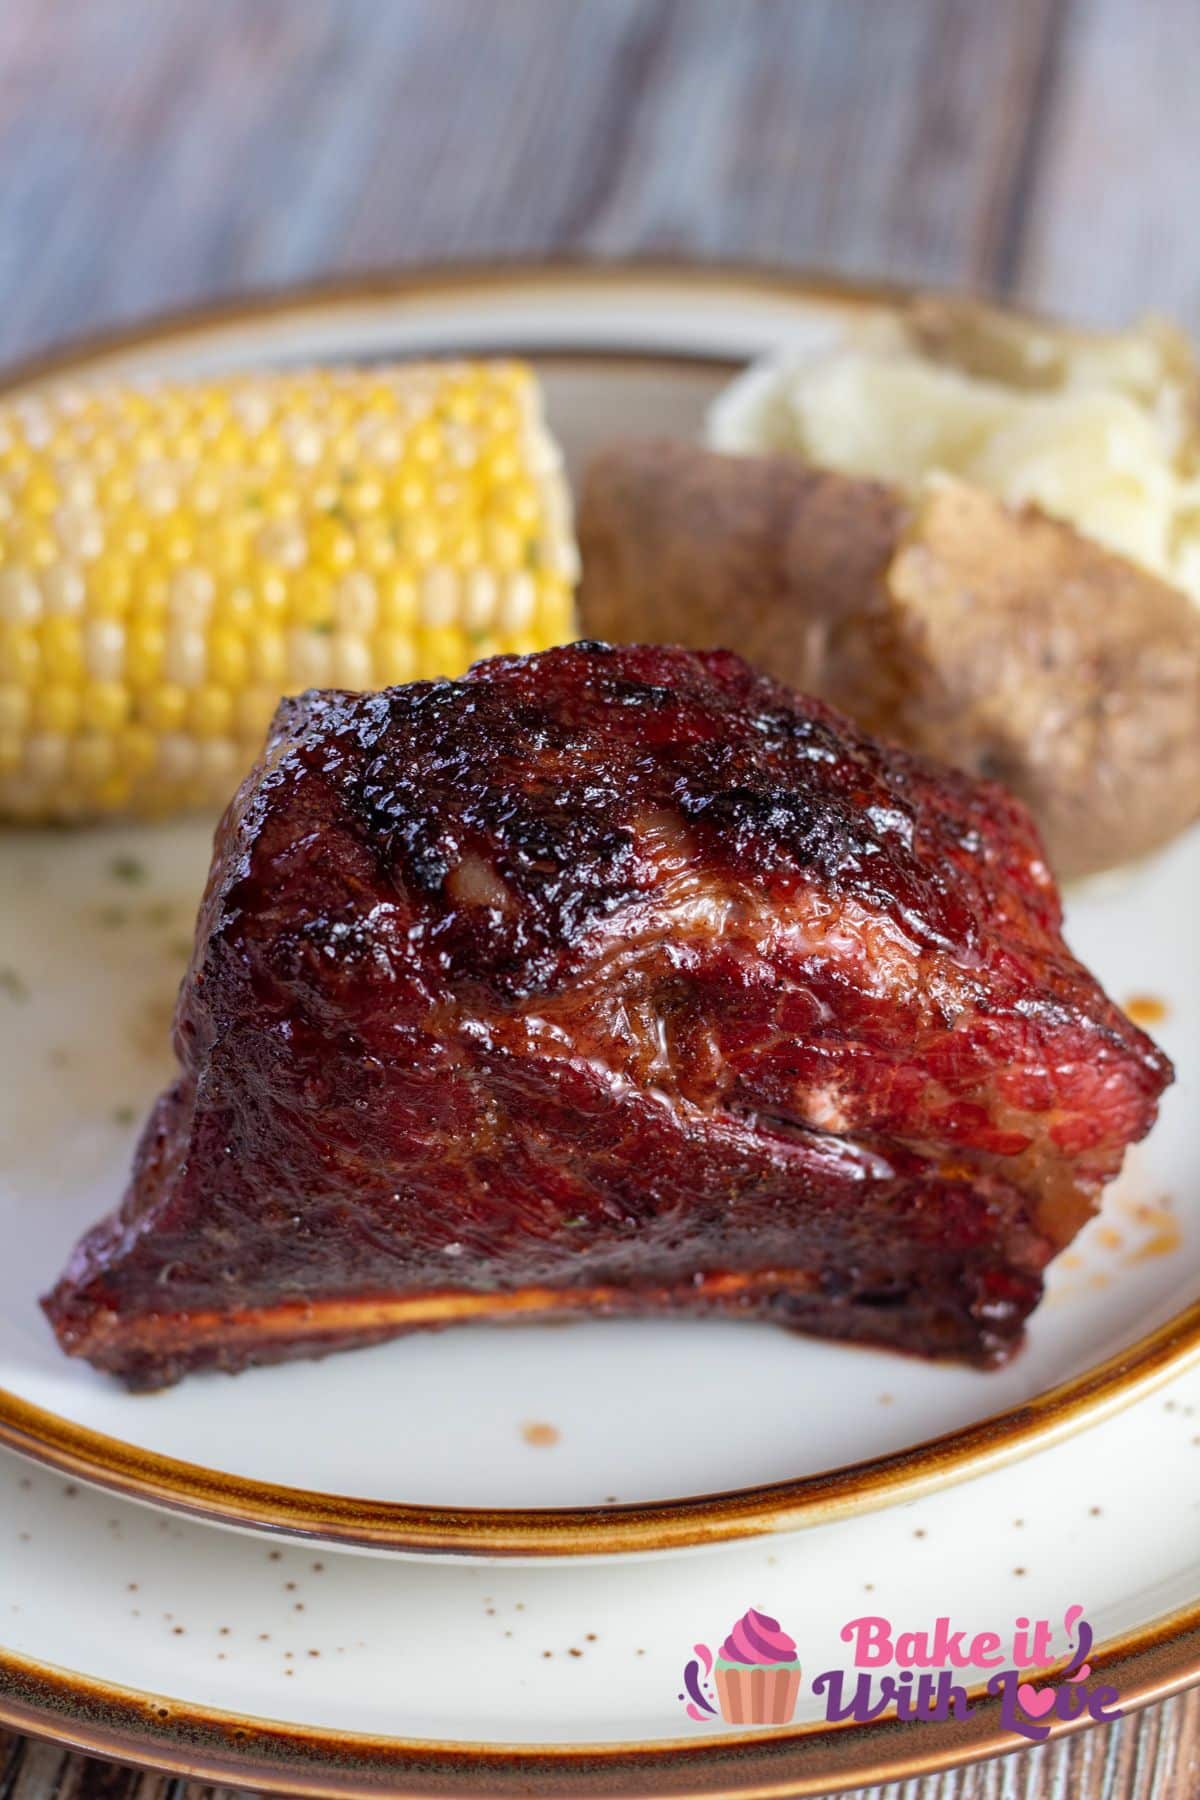 Tall image of the smoked short ribs served up with baked potato and corn on the cob.